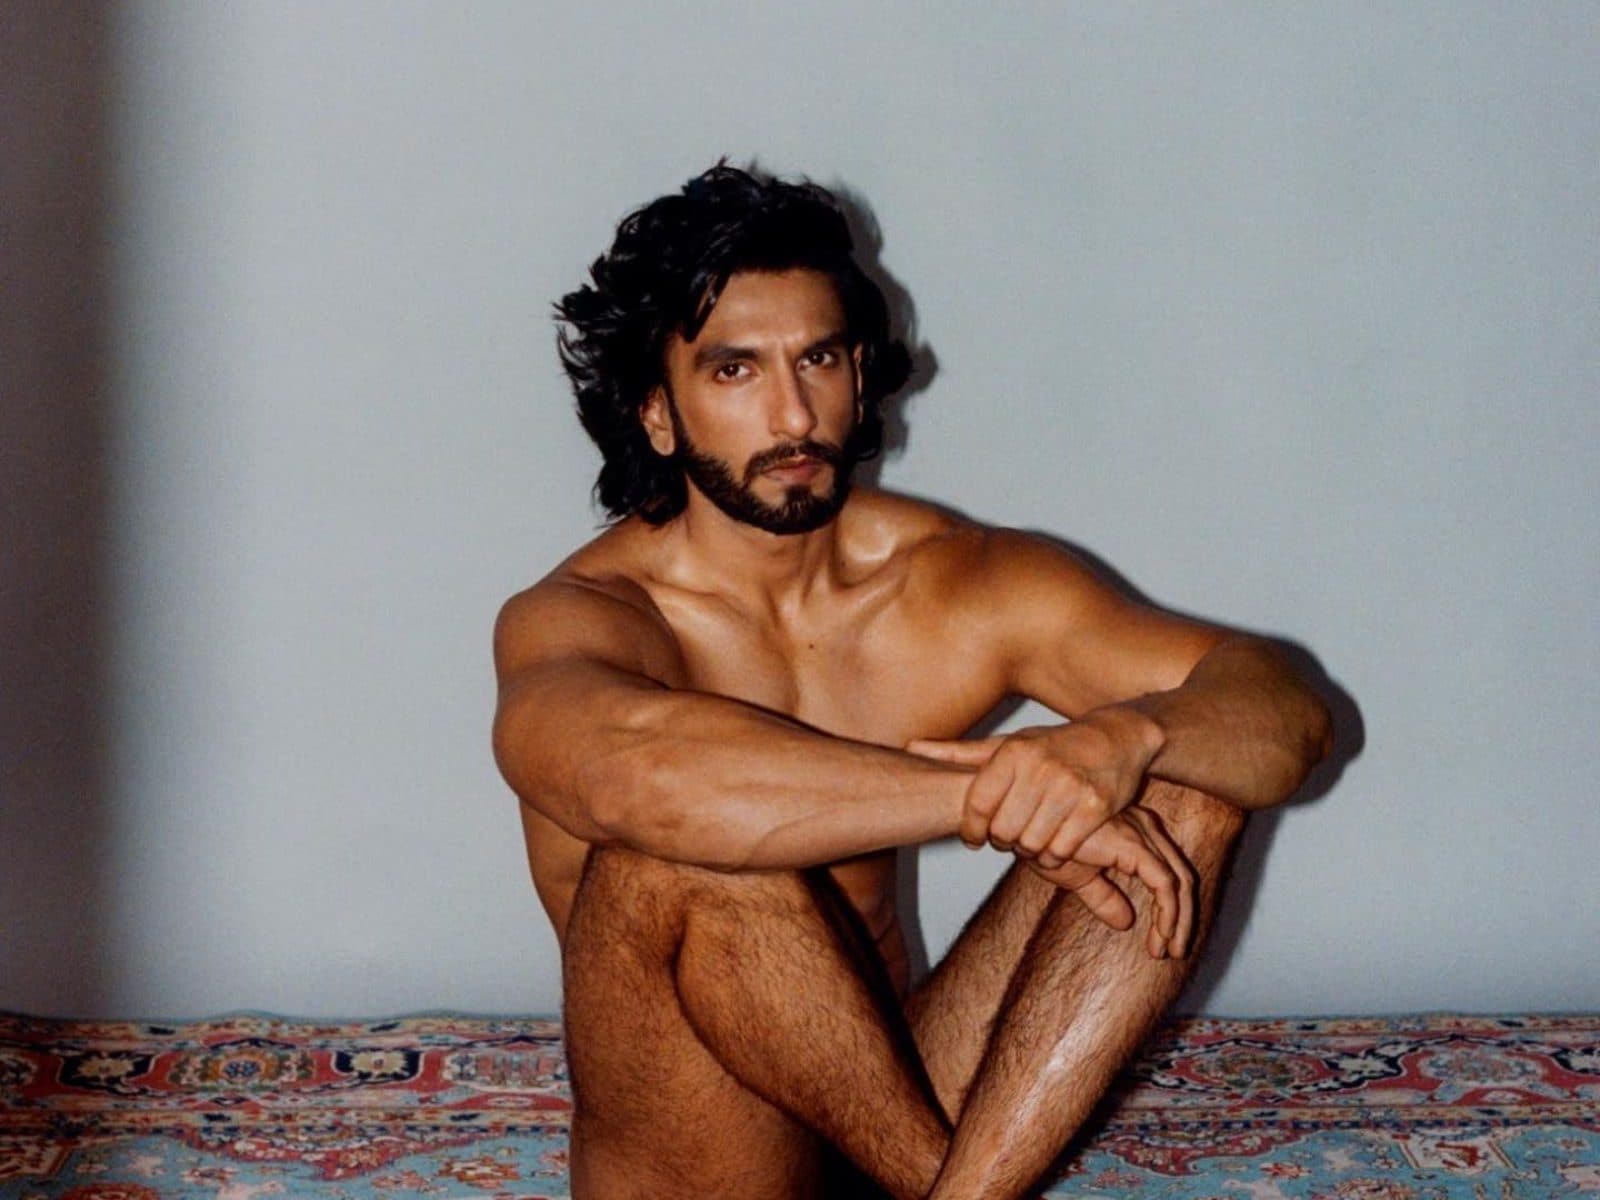 Naked Indian Sports - BuzzFix: Why Ranveer Singh's Masculinity Redefining Nude Shoot Does Not  Insult Women's Modesty